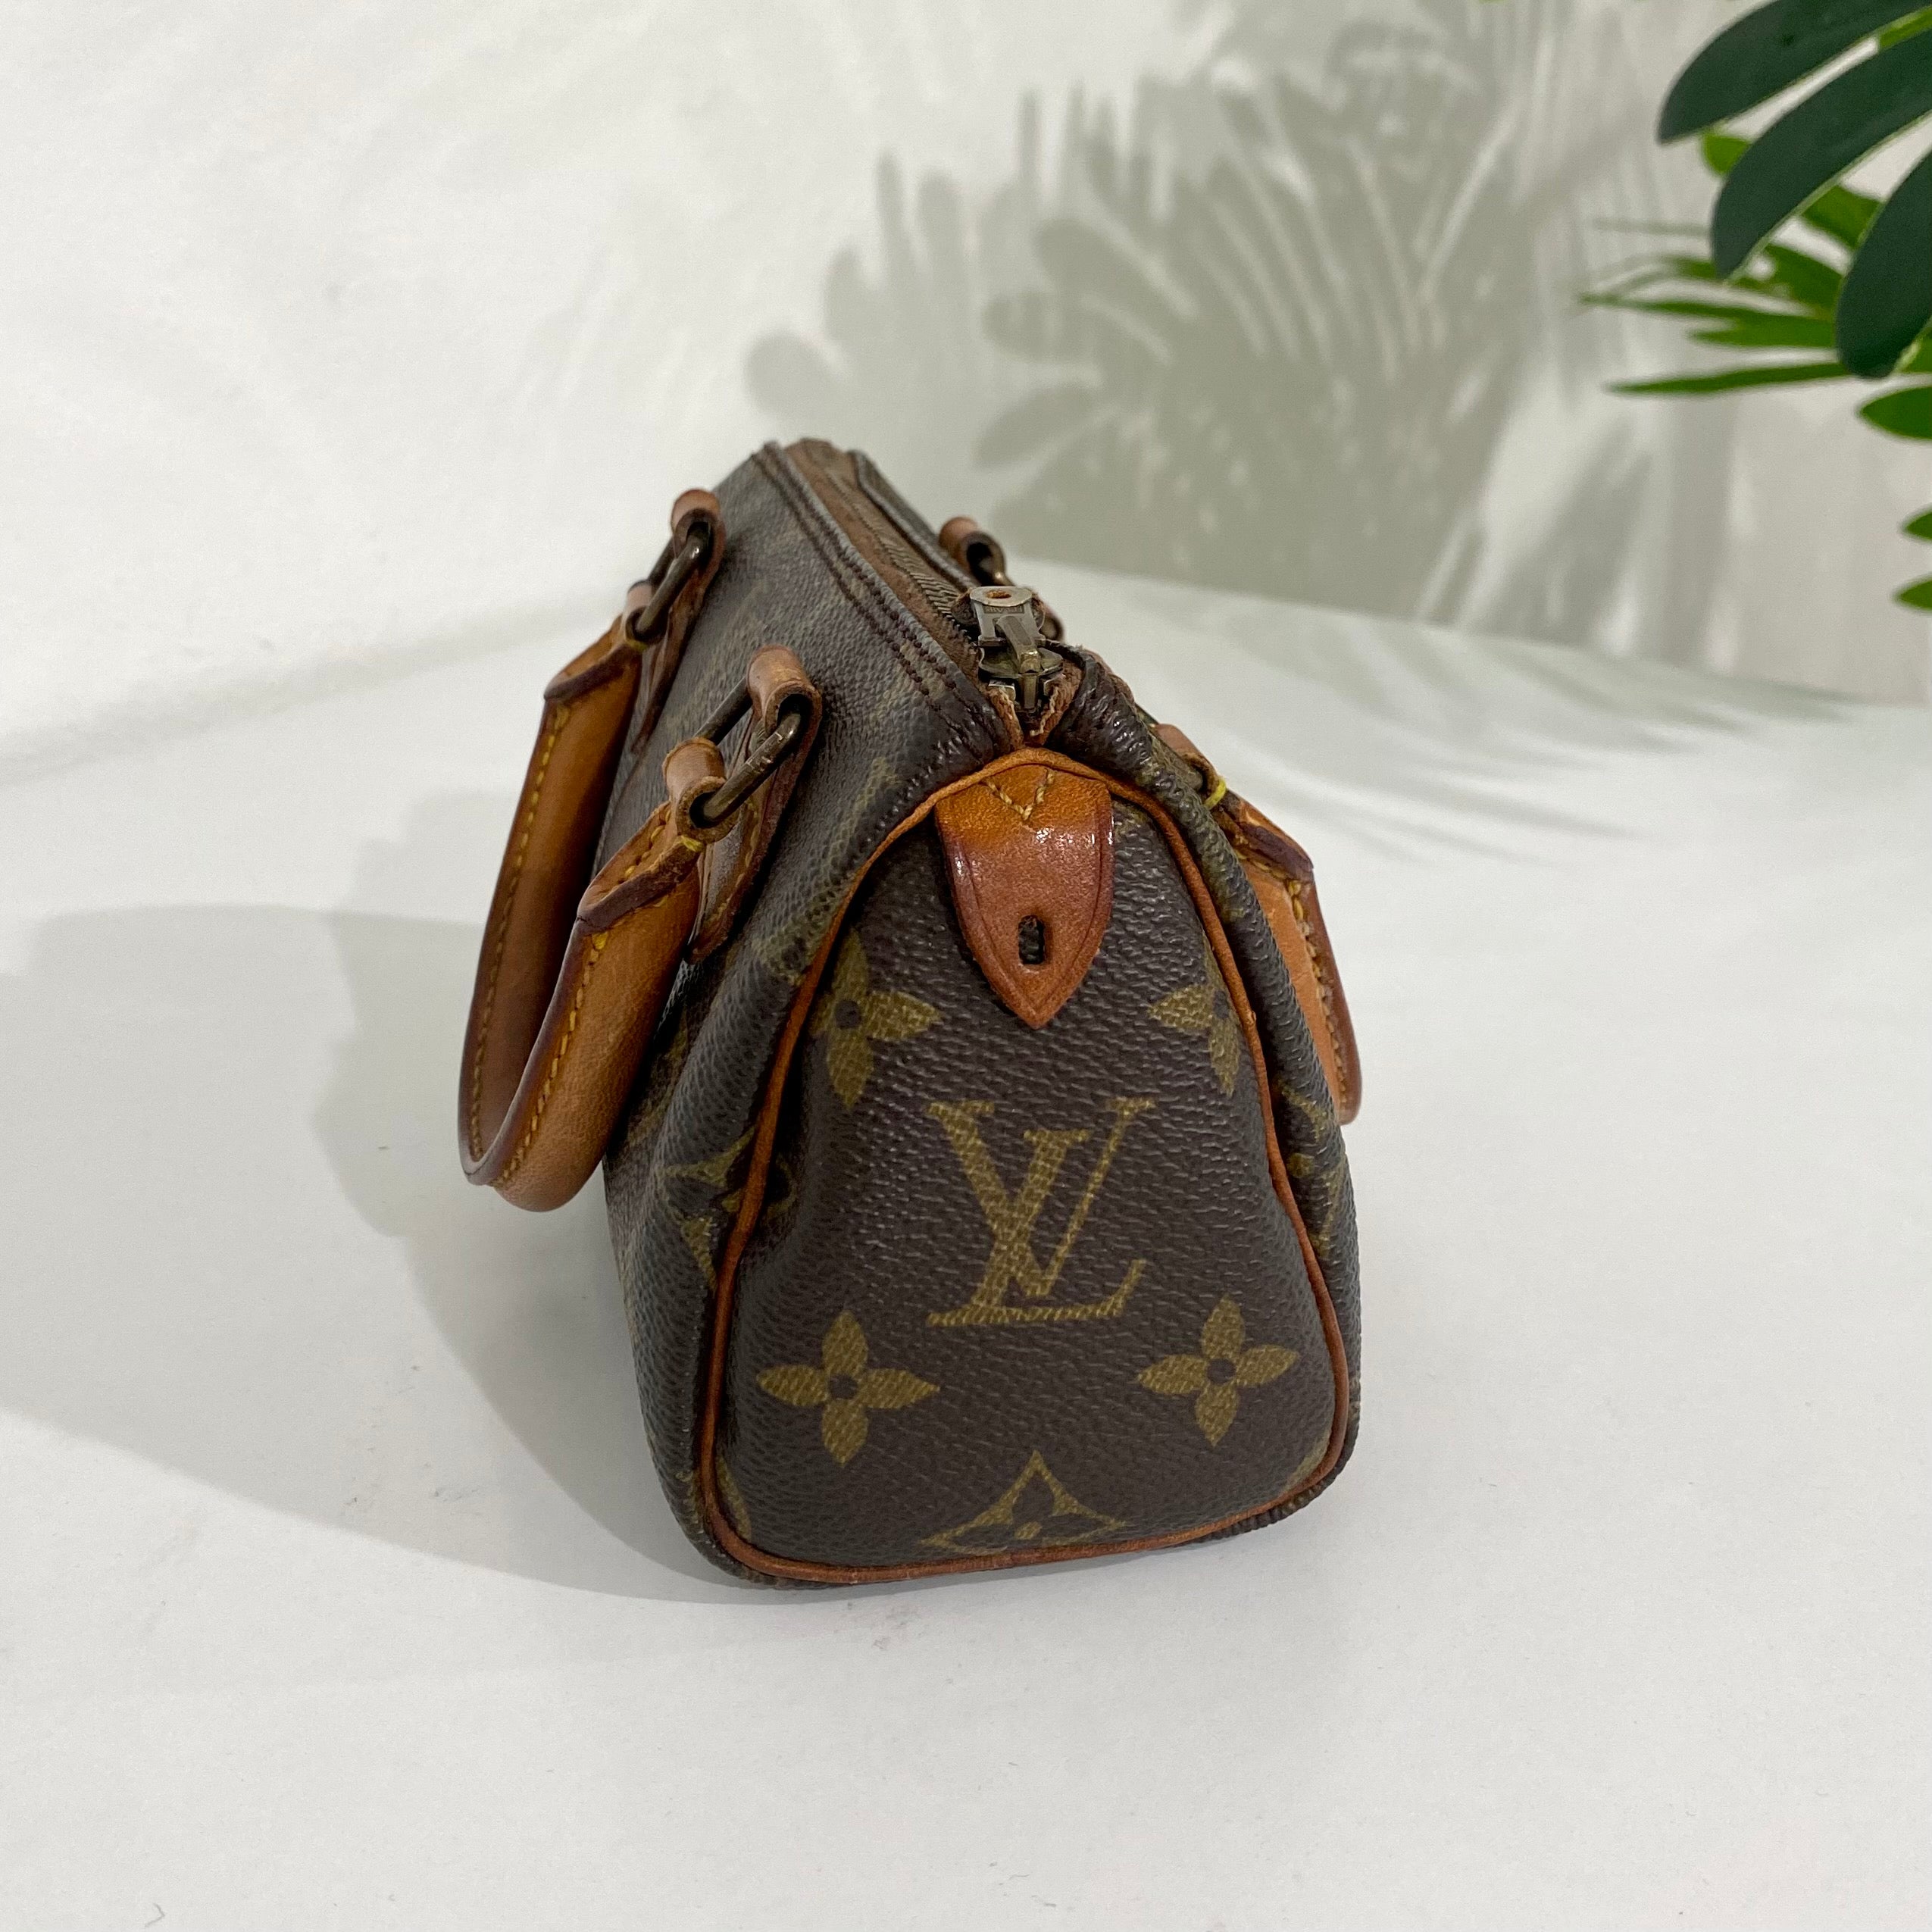 Louis Vuitton Speedy Nano Vintage style With dustbag / new 96% Hiếm lắm .  Only 1x ạ [ SOLD ]